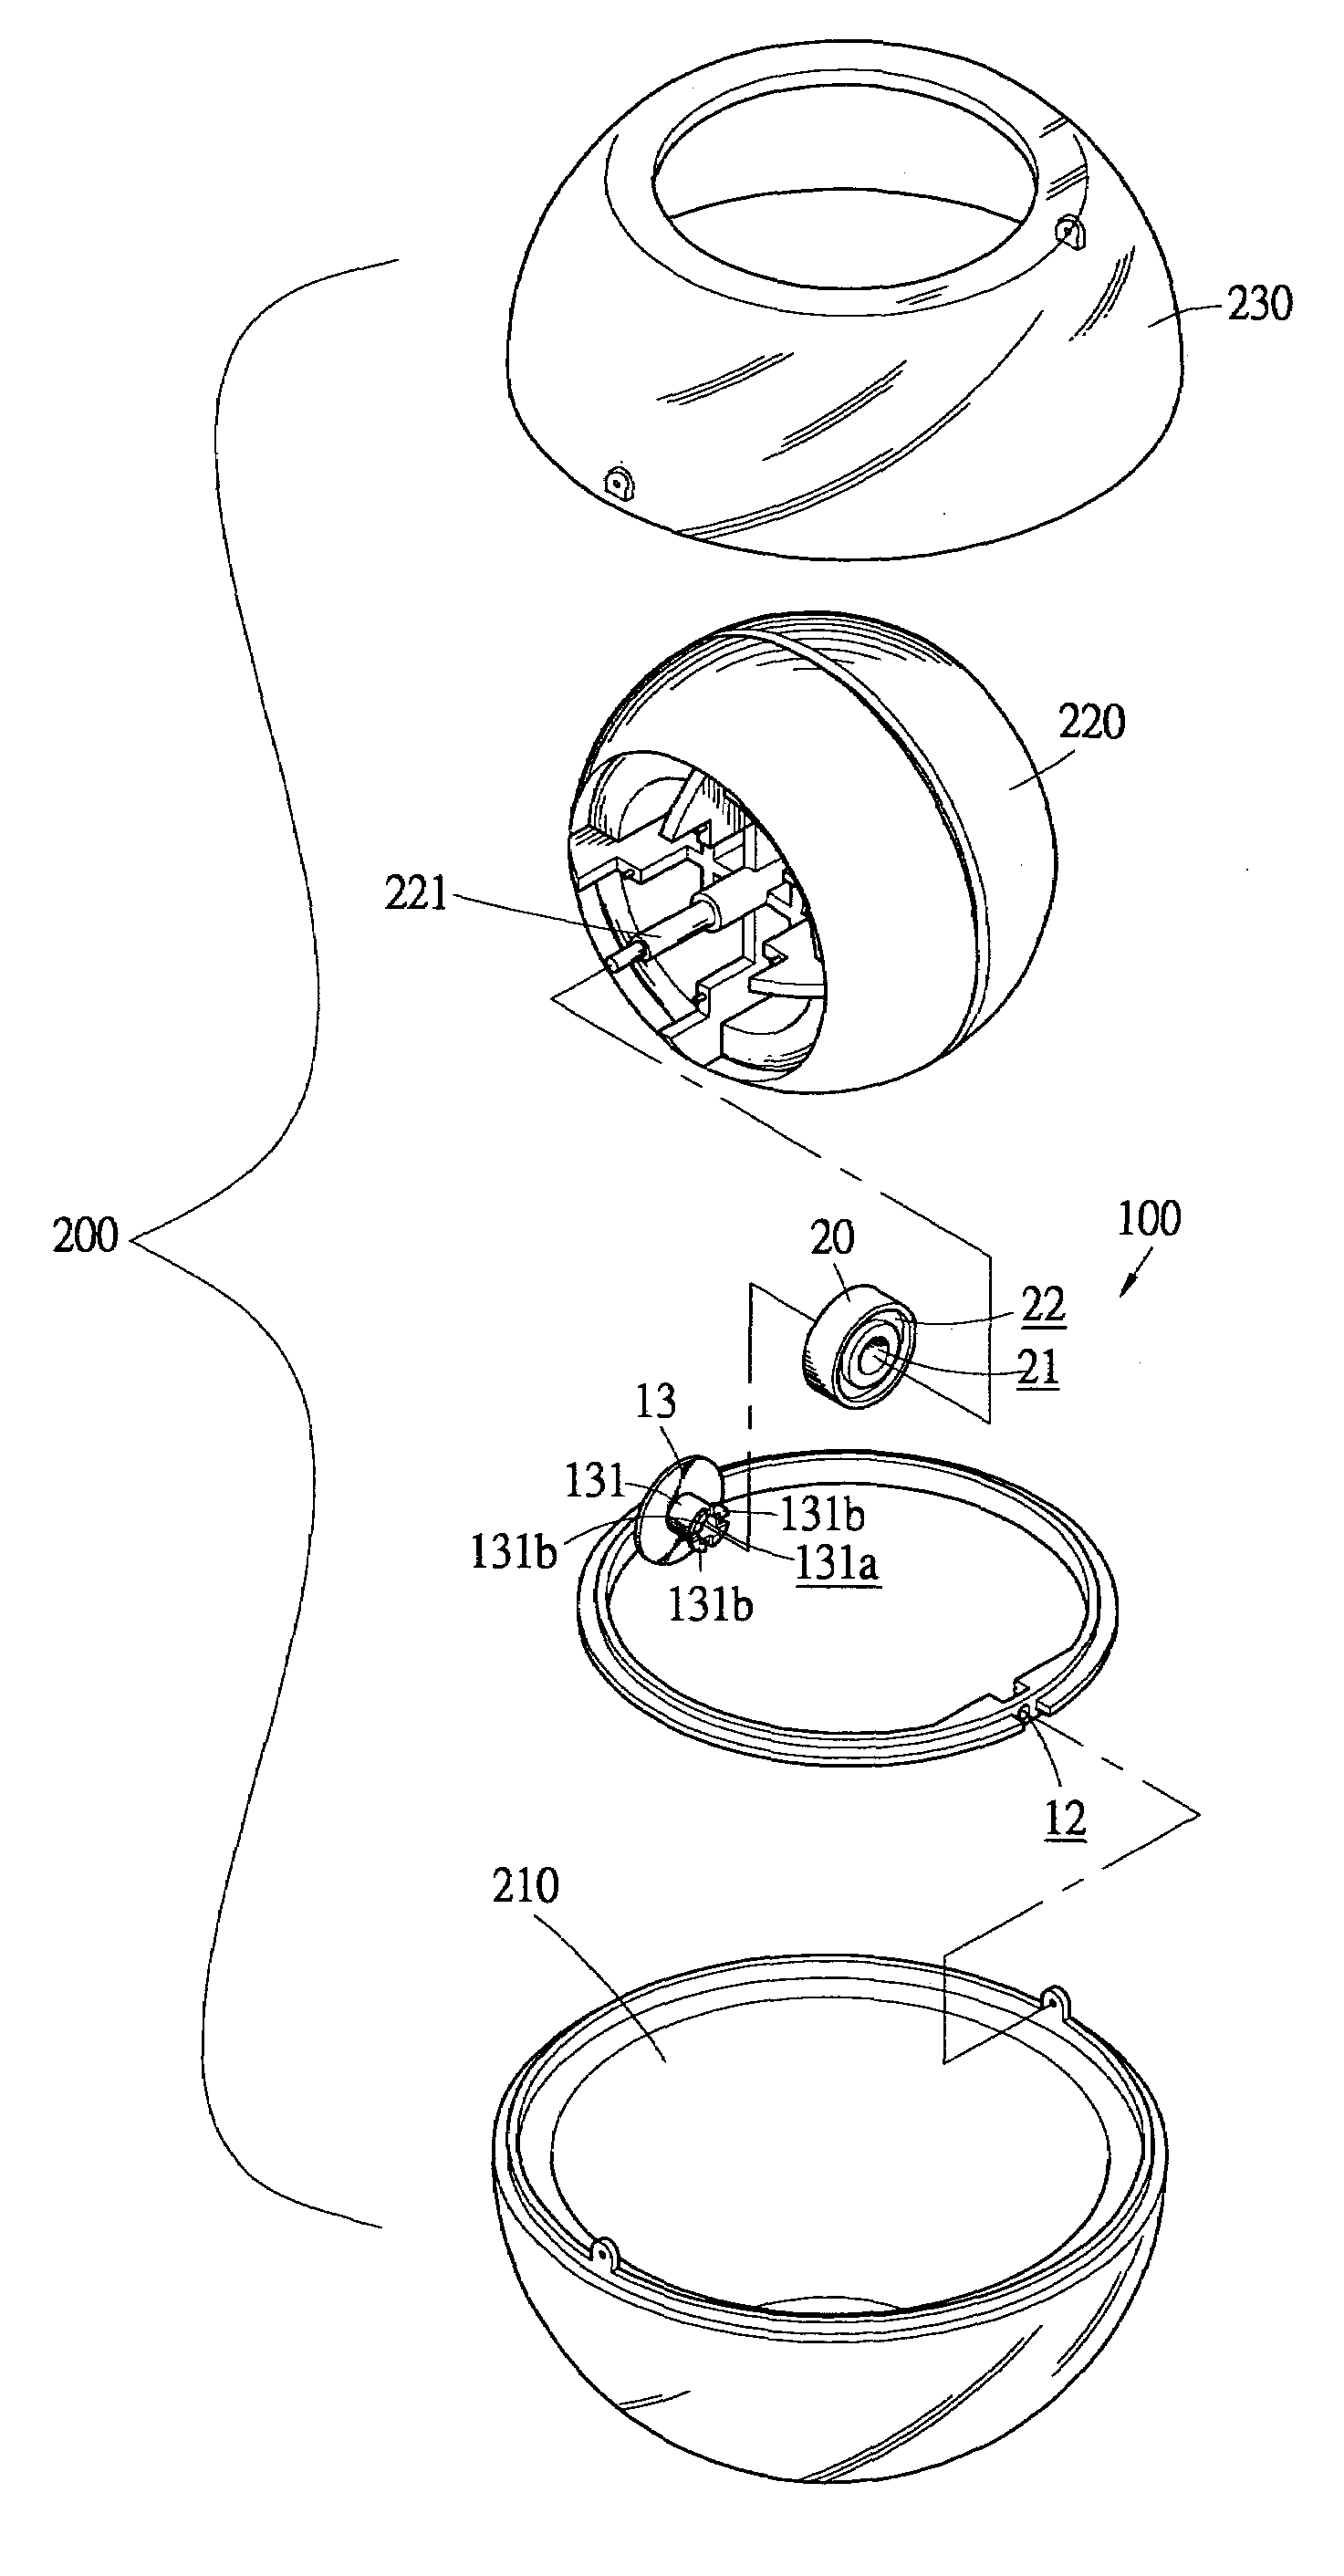 Balance-enhancing and vibration-reducing device for wrist exerciser